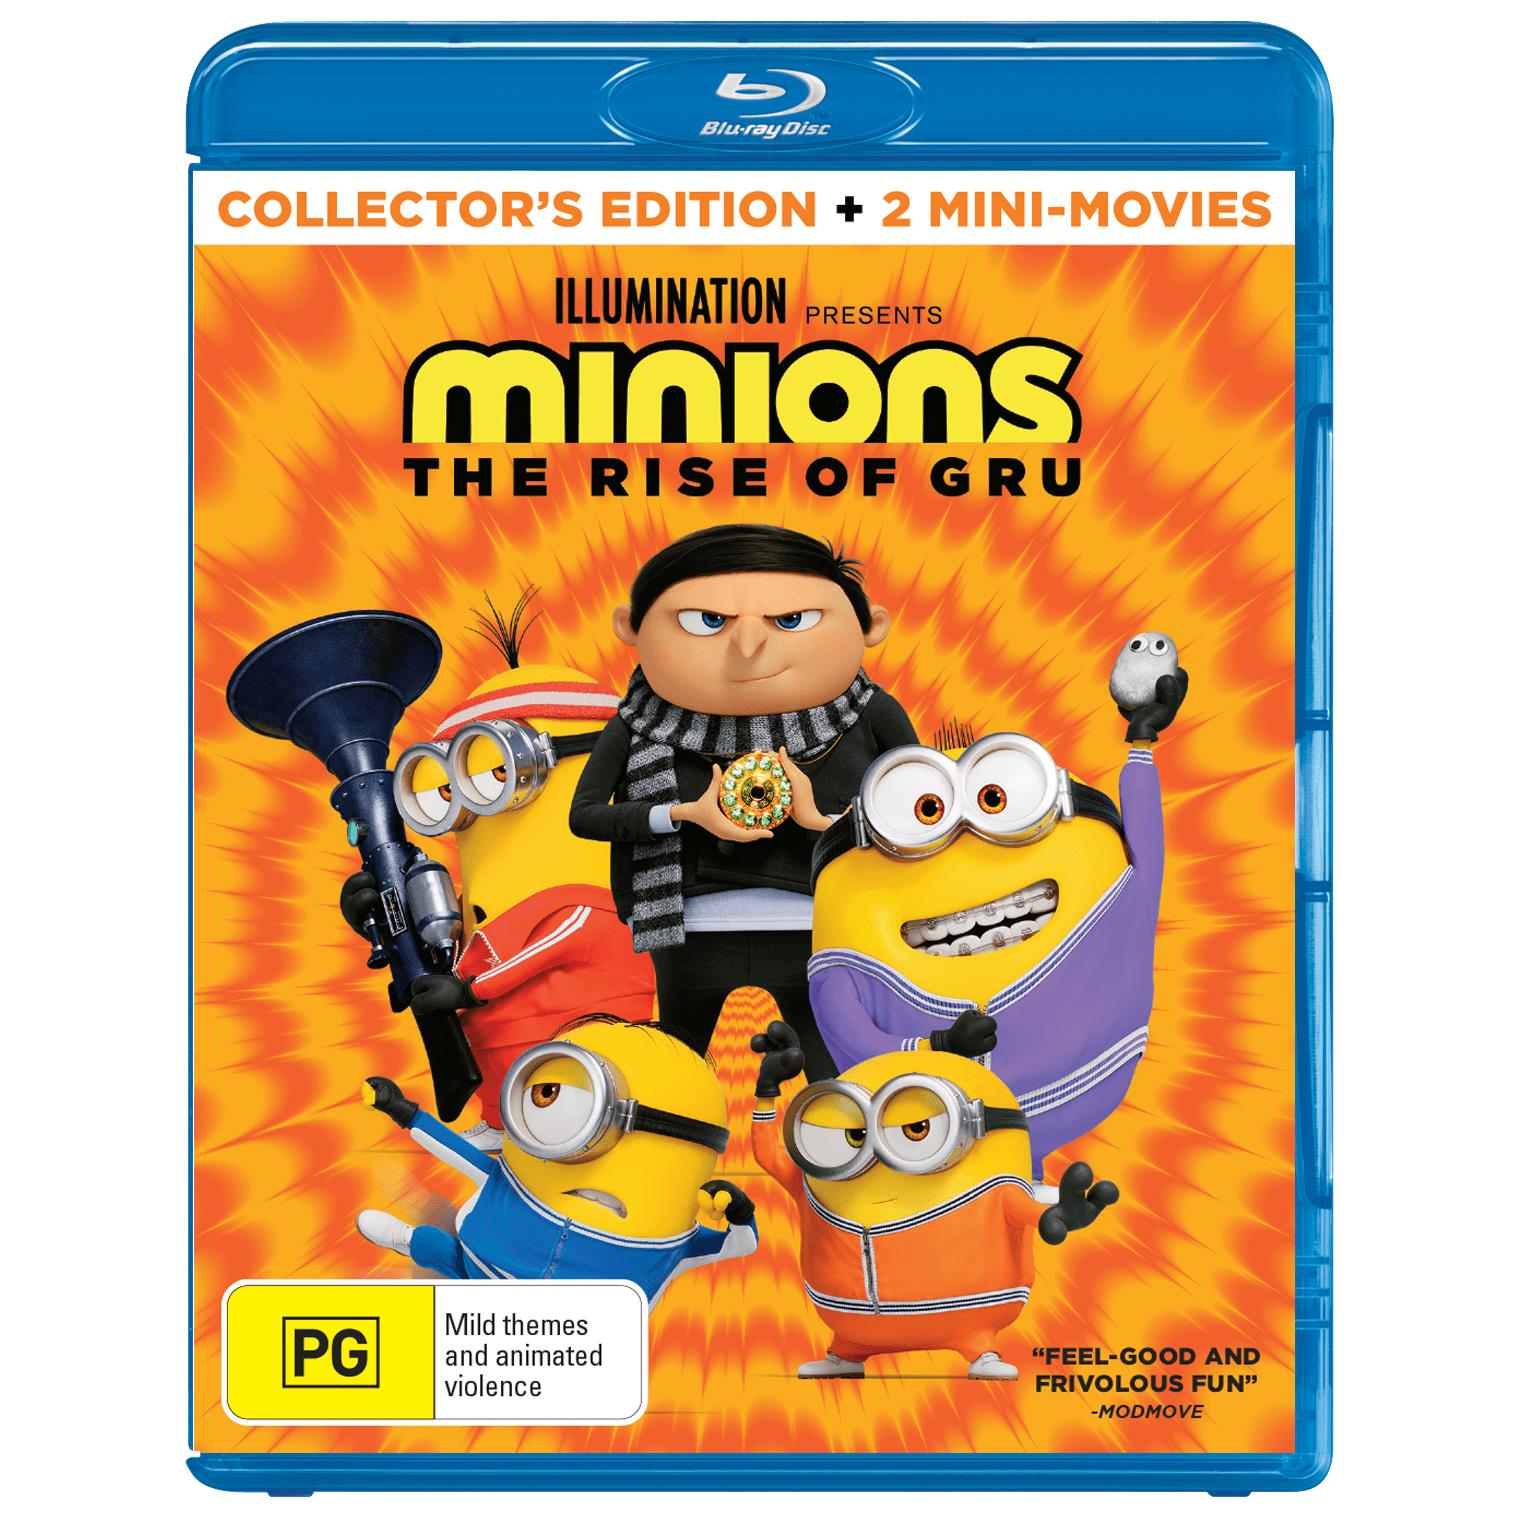 Buy ekids Minions The Rise of Gru Laser Tag 2 Player Games for